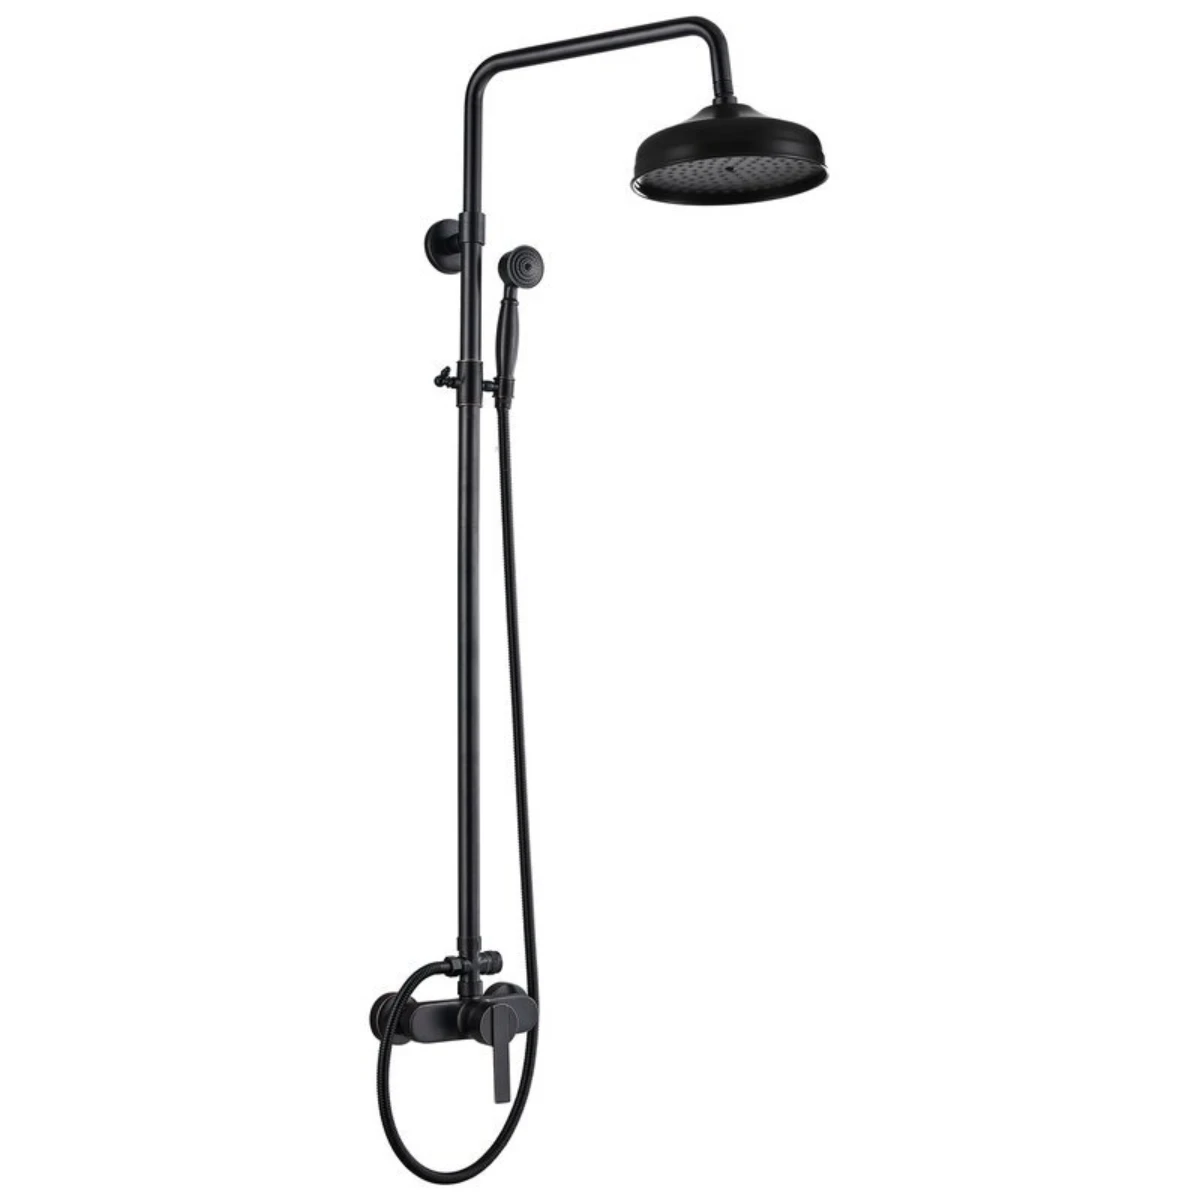 

Oil Rubbed Bronze Shower Fixture Exposed Pipe Shower System Brass 8 Inch Dual Functions Rainfall Overhead with Handheld Spray So